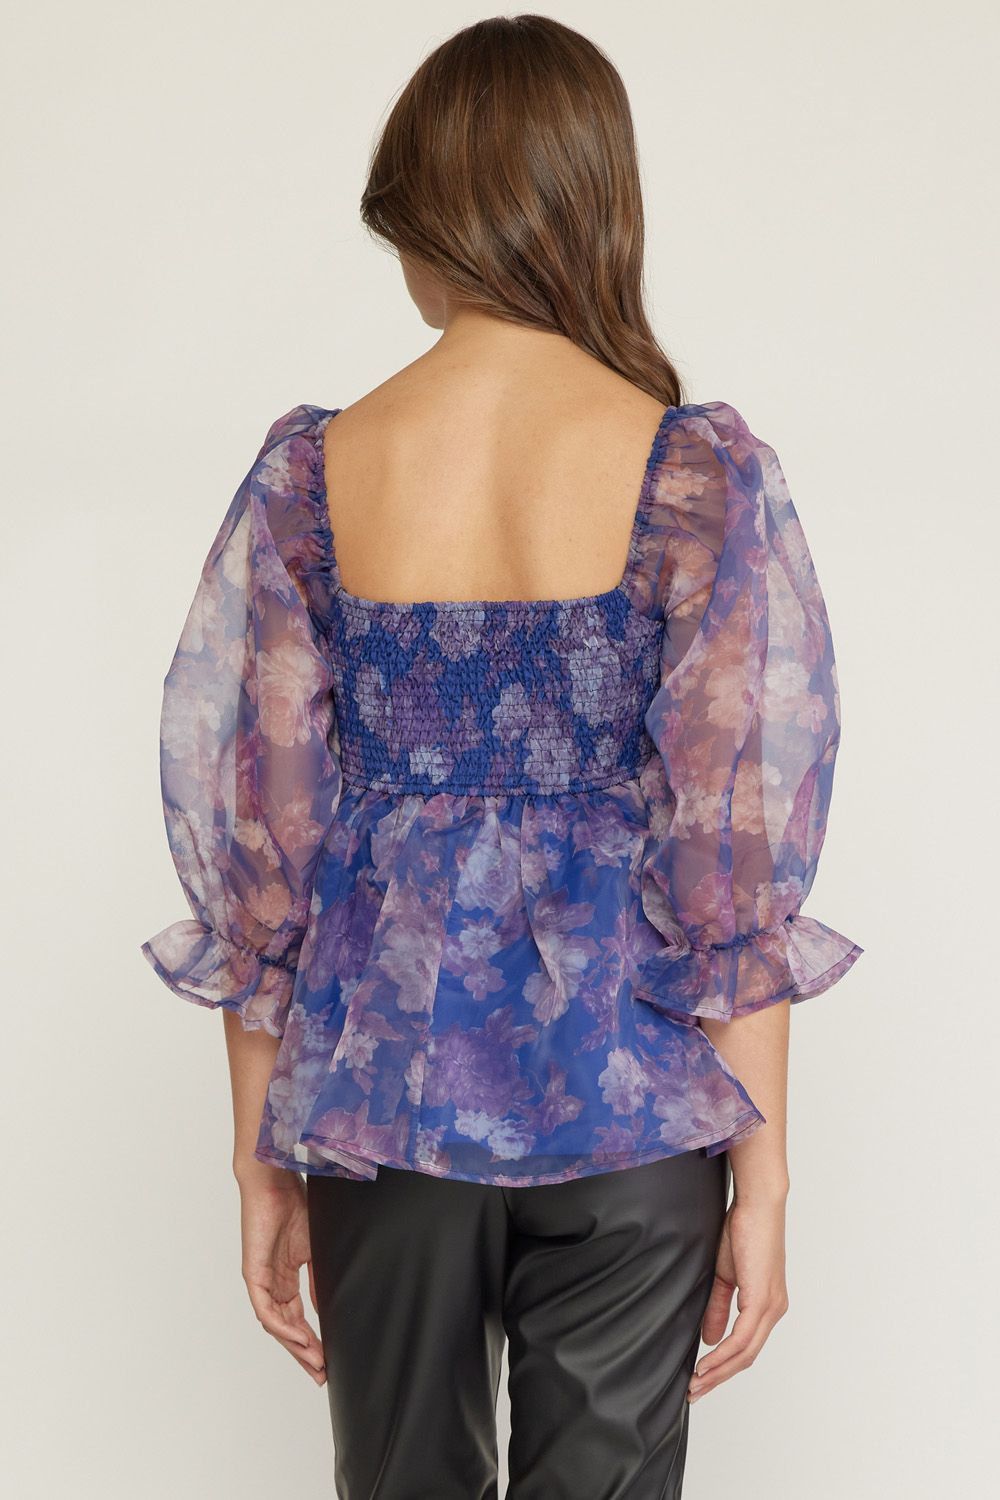 Entro 50 Shades of Floral Top - Midnight, square neck, semi sheer, 3/4 sleeve, ruffles, peplum, smocked back